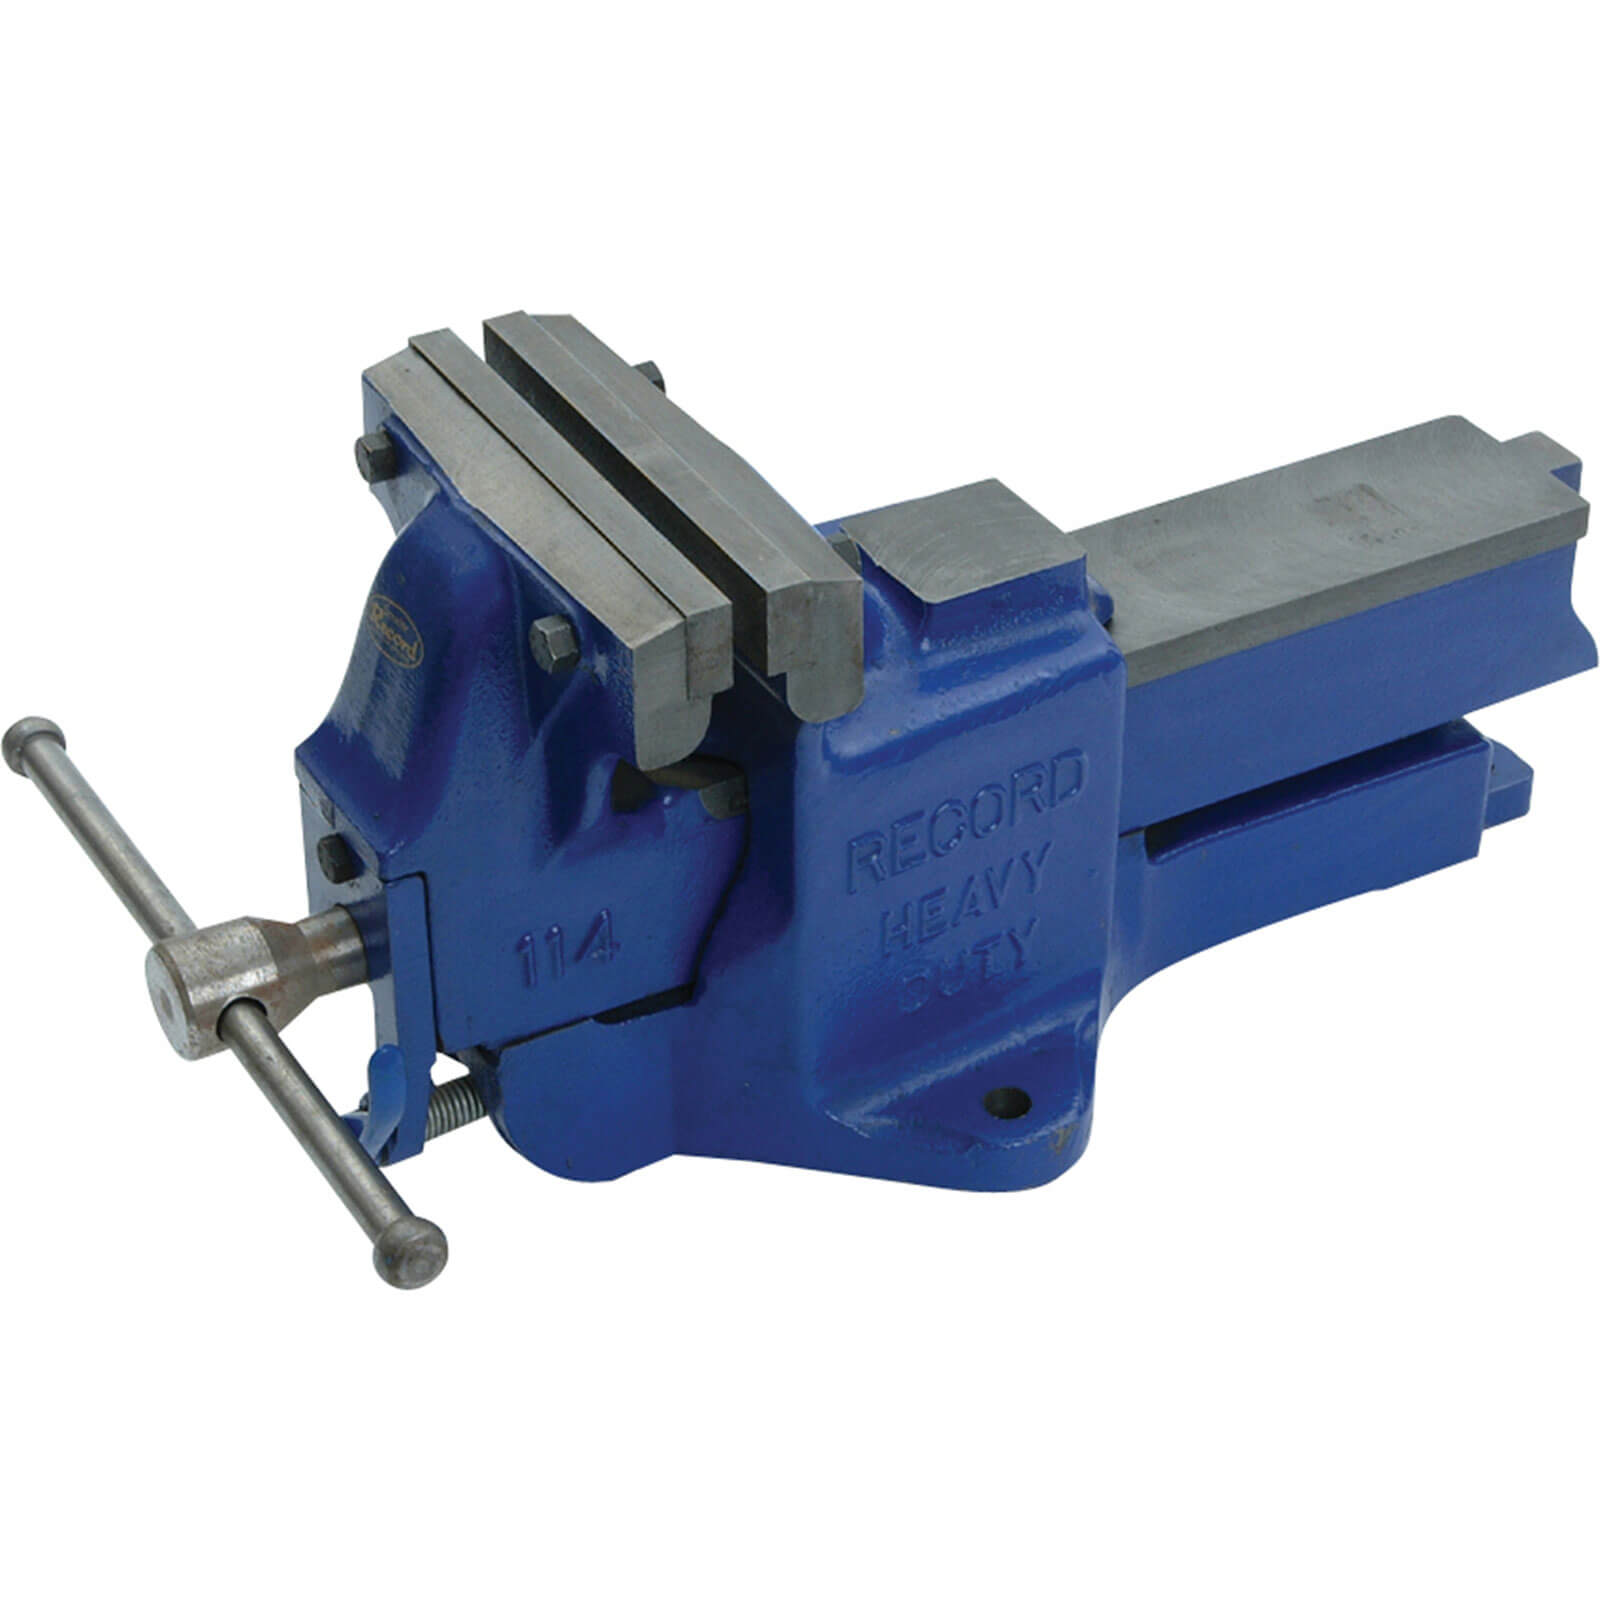 Image of Record Engineers Heavy Duty Quick Release Vice 200mm